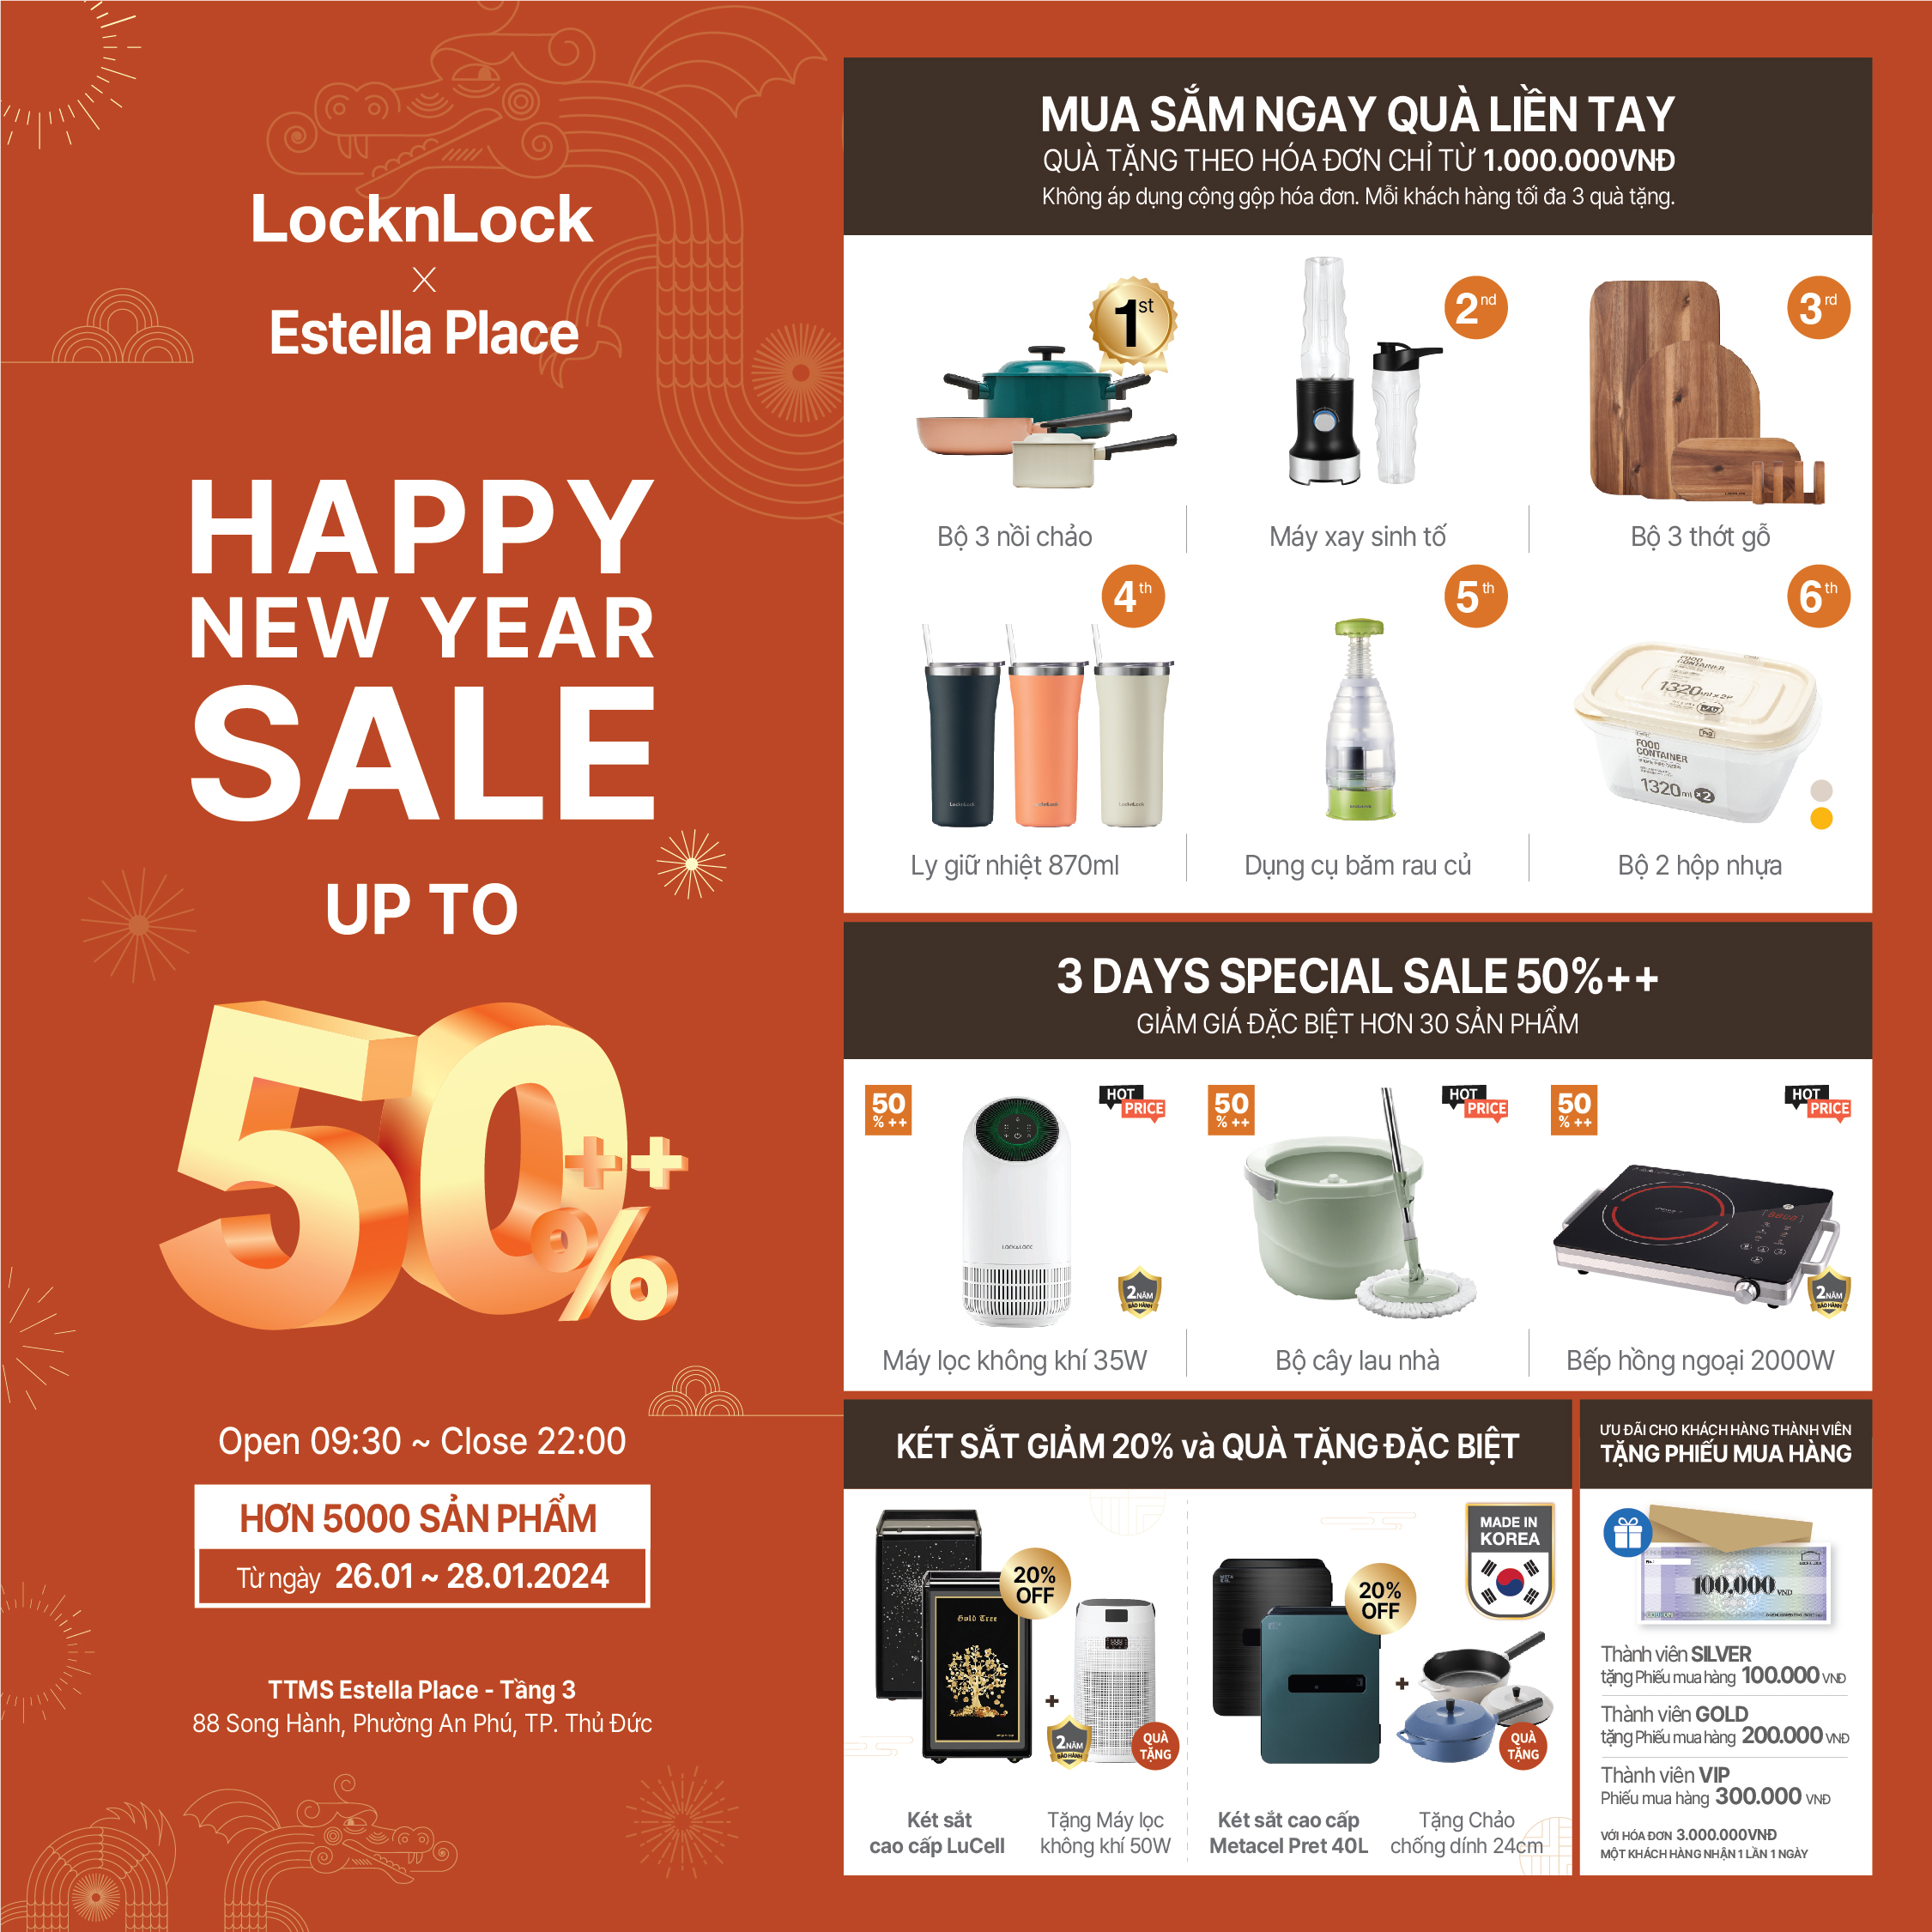 HAPPY NEW YEAR SALE UP TO 50%++ ON OVER 5000 PRODUCTS